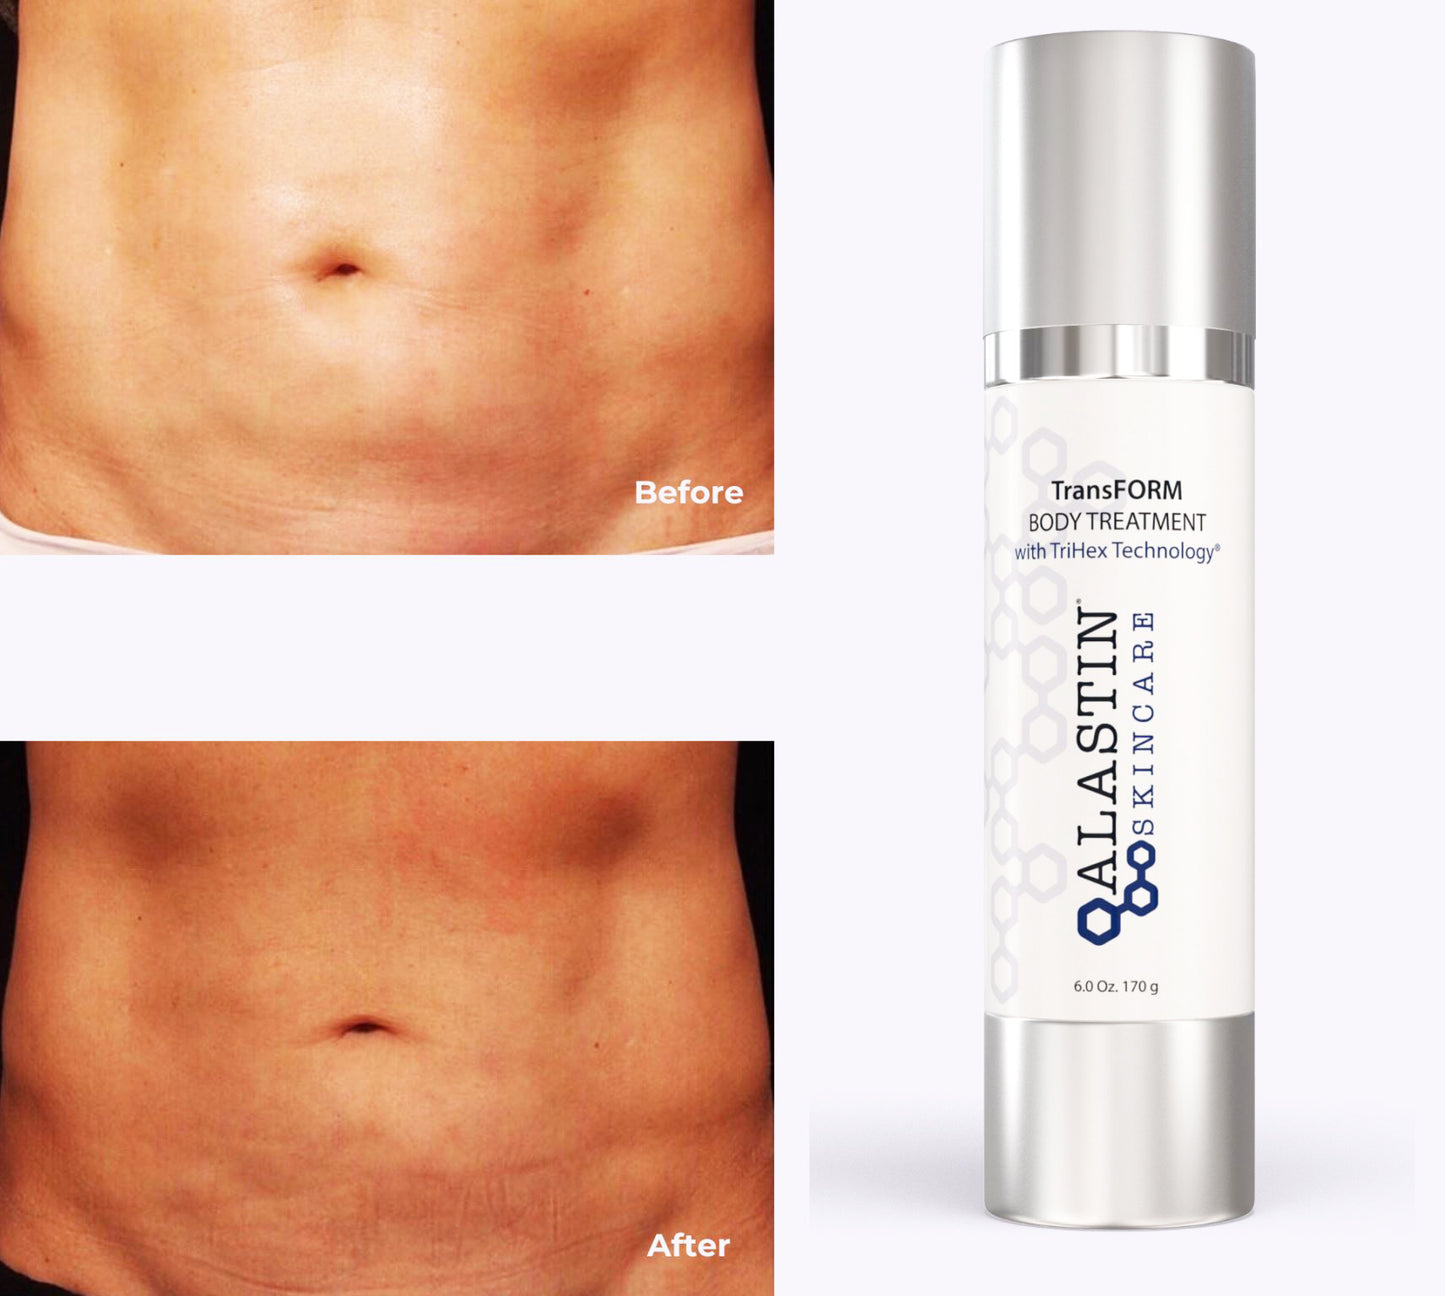 ALASTIN'S TransFORM Body Treatment before and after